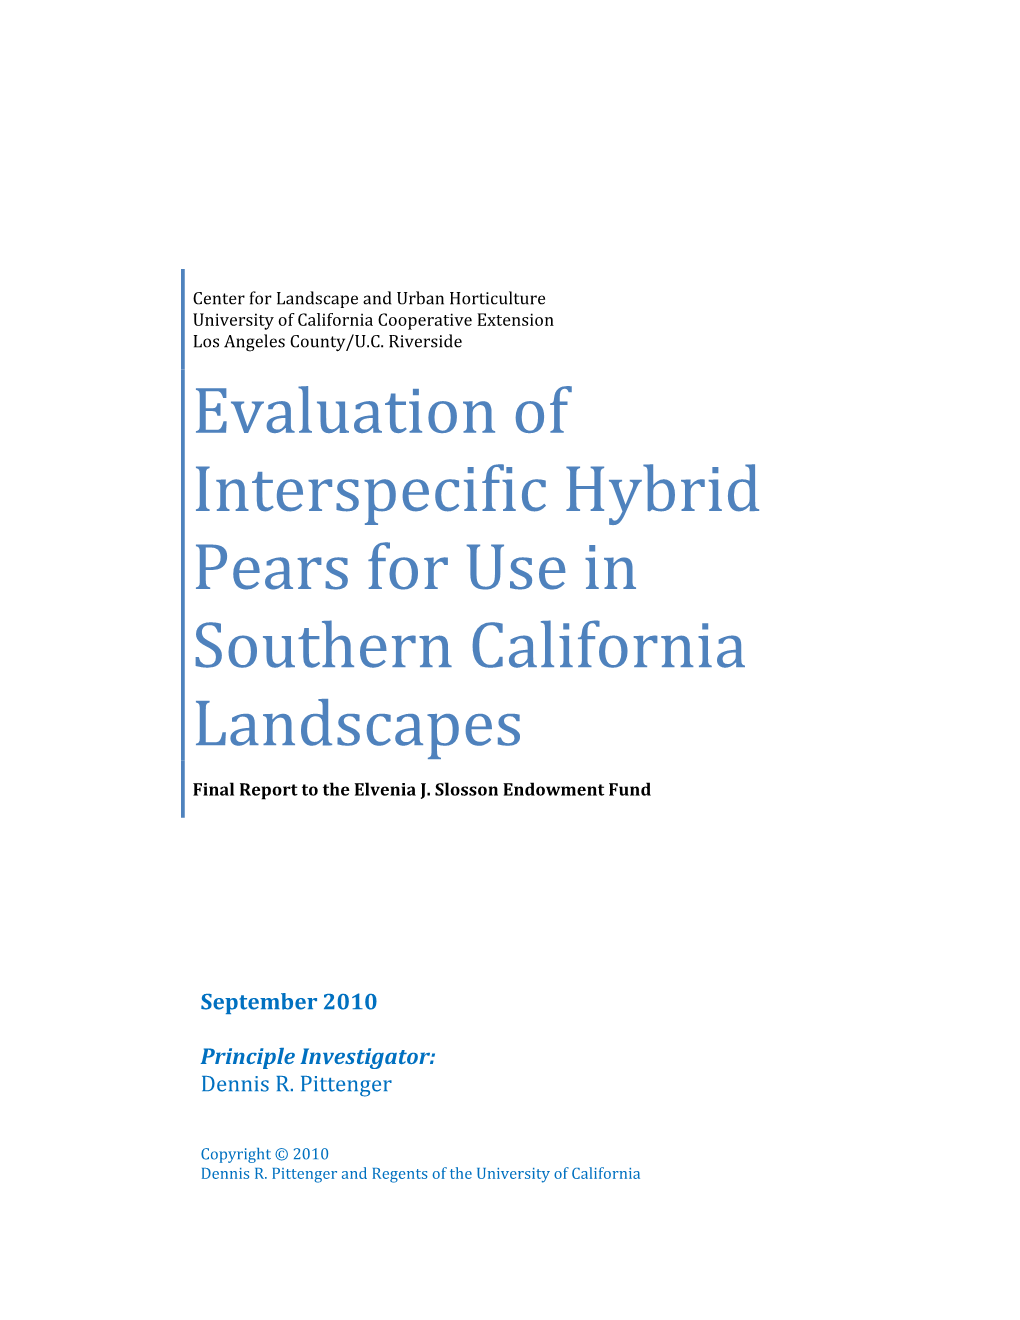 Evaluation of Interspecific Hybrid Pears for Use in Southern California Landscapes